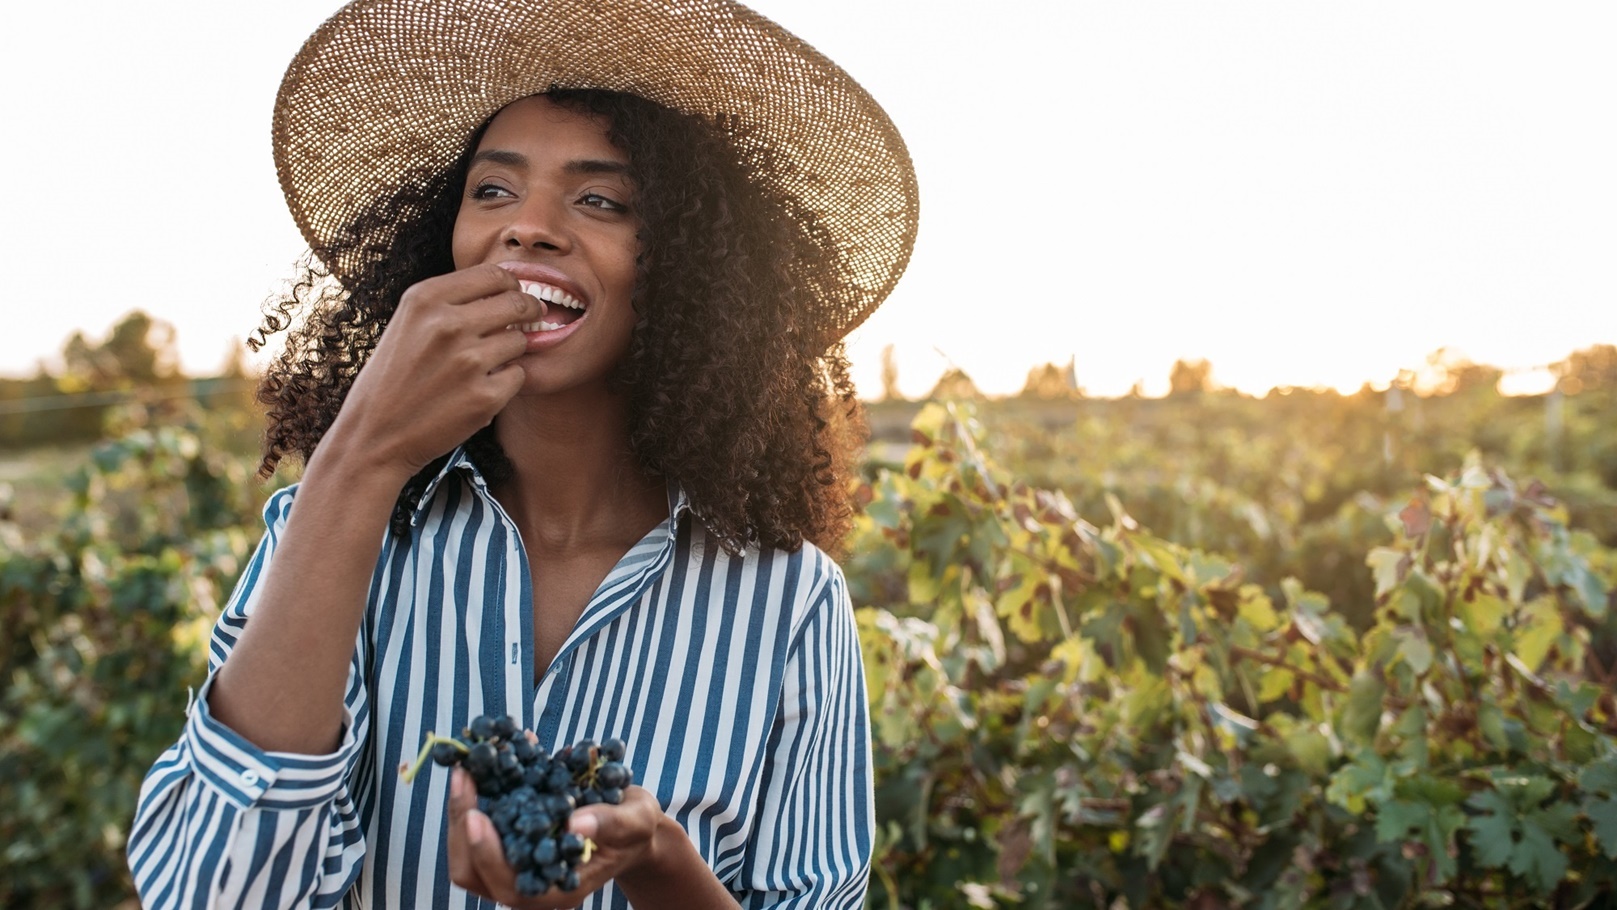 happy-young-woman-in-a-straw-hat-eating-grapes-in-2021-08-26-20-17-10-utc